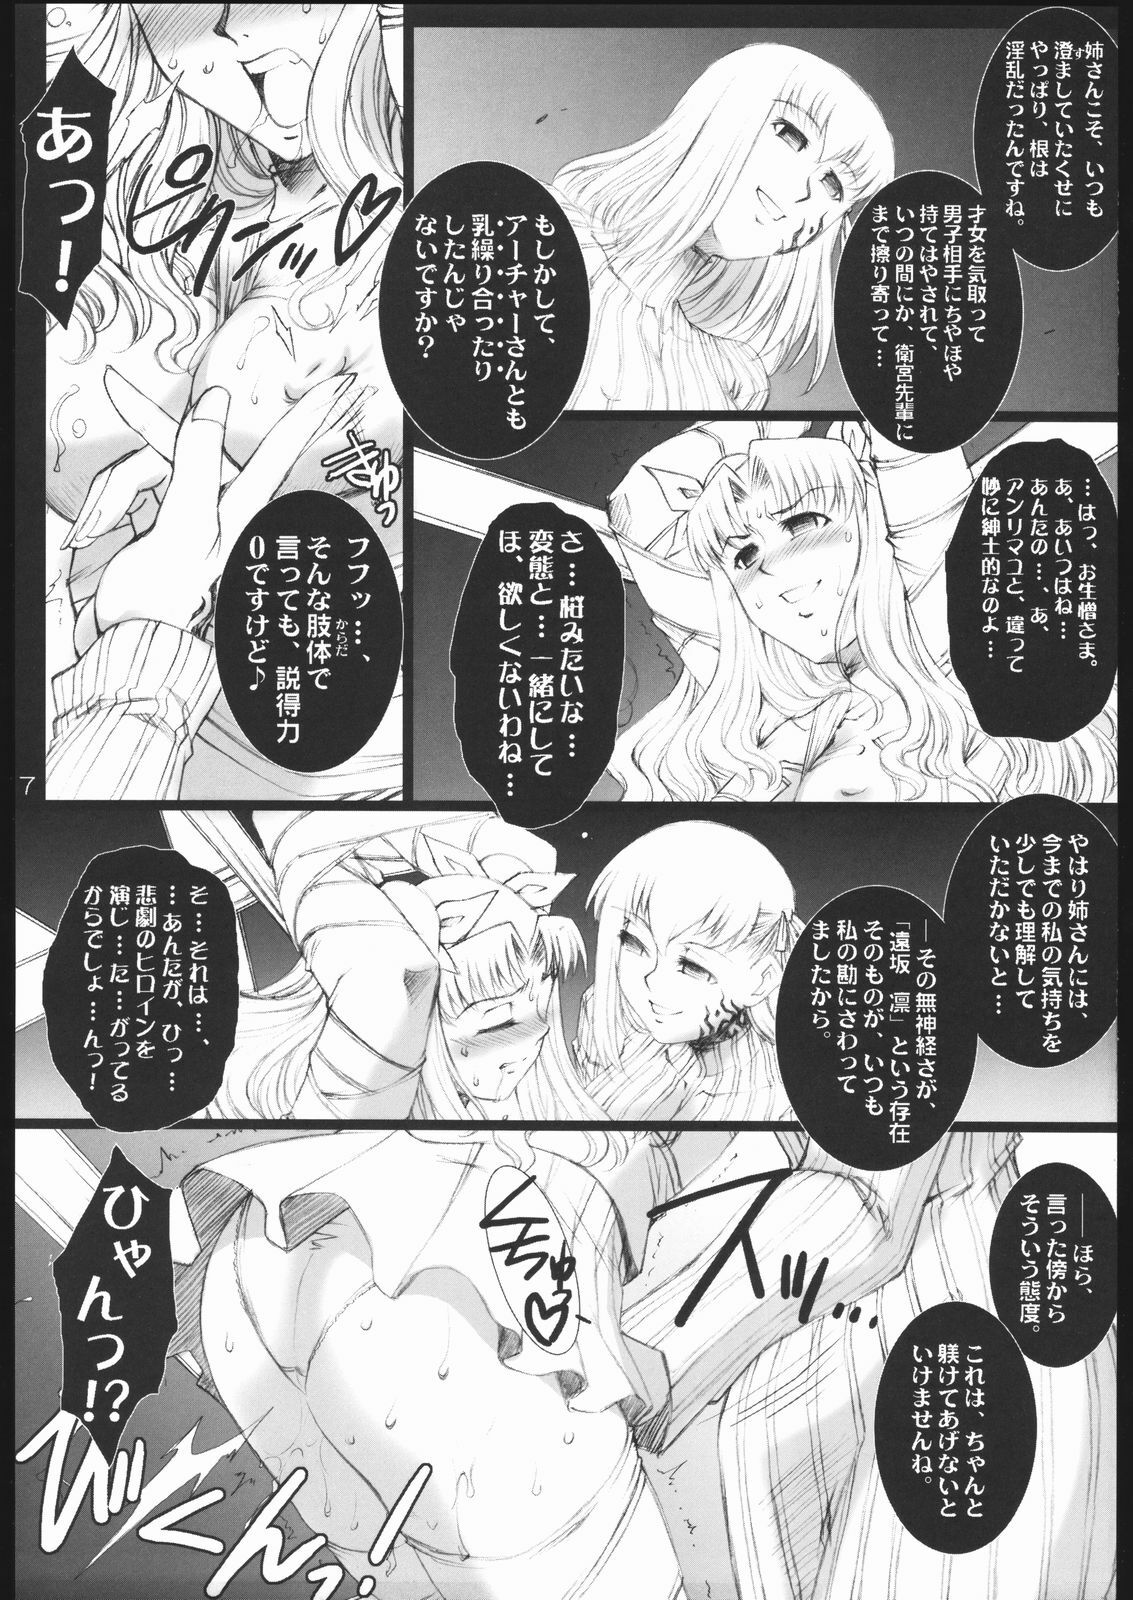 (SC33) [H.B (B-RIVER)] Red Degeneration -DAY/1- (Fate/stay night) page 6 full